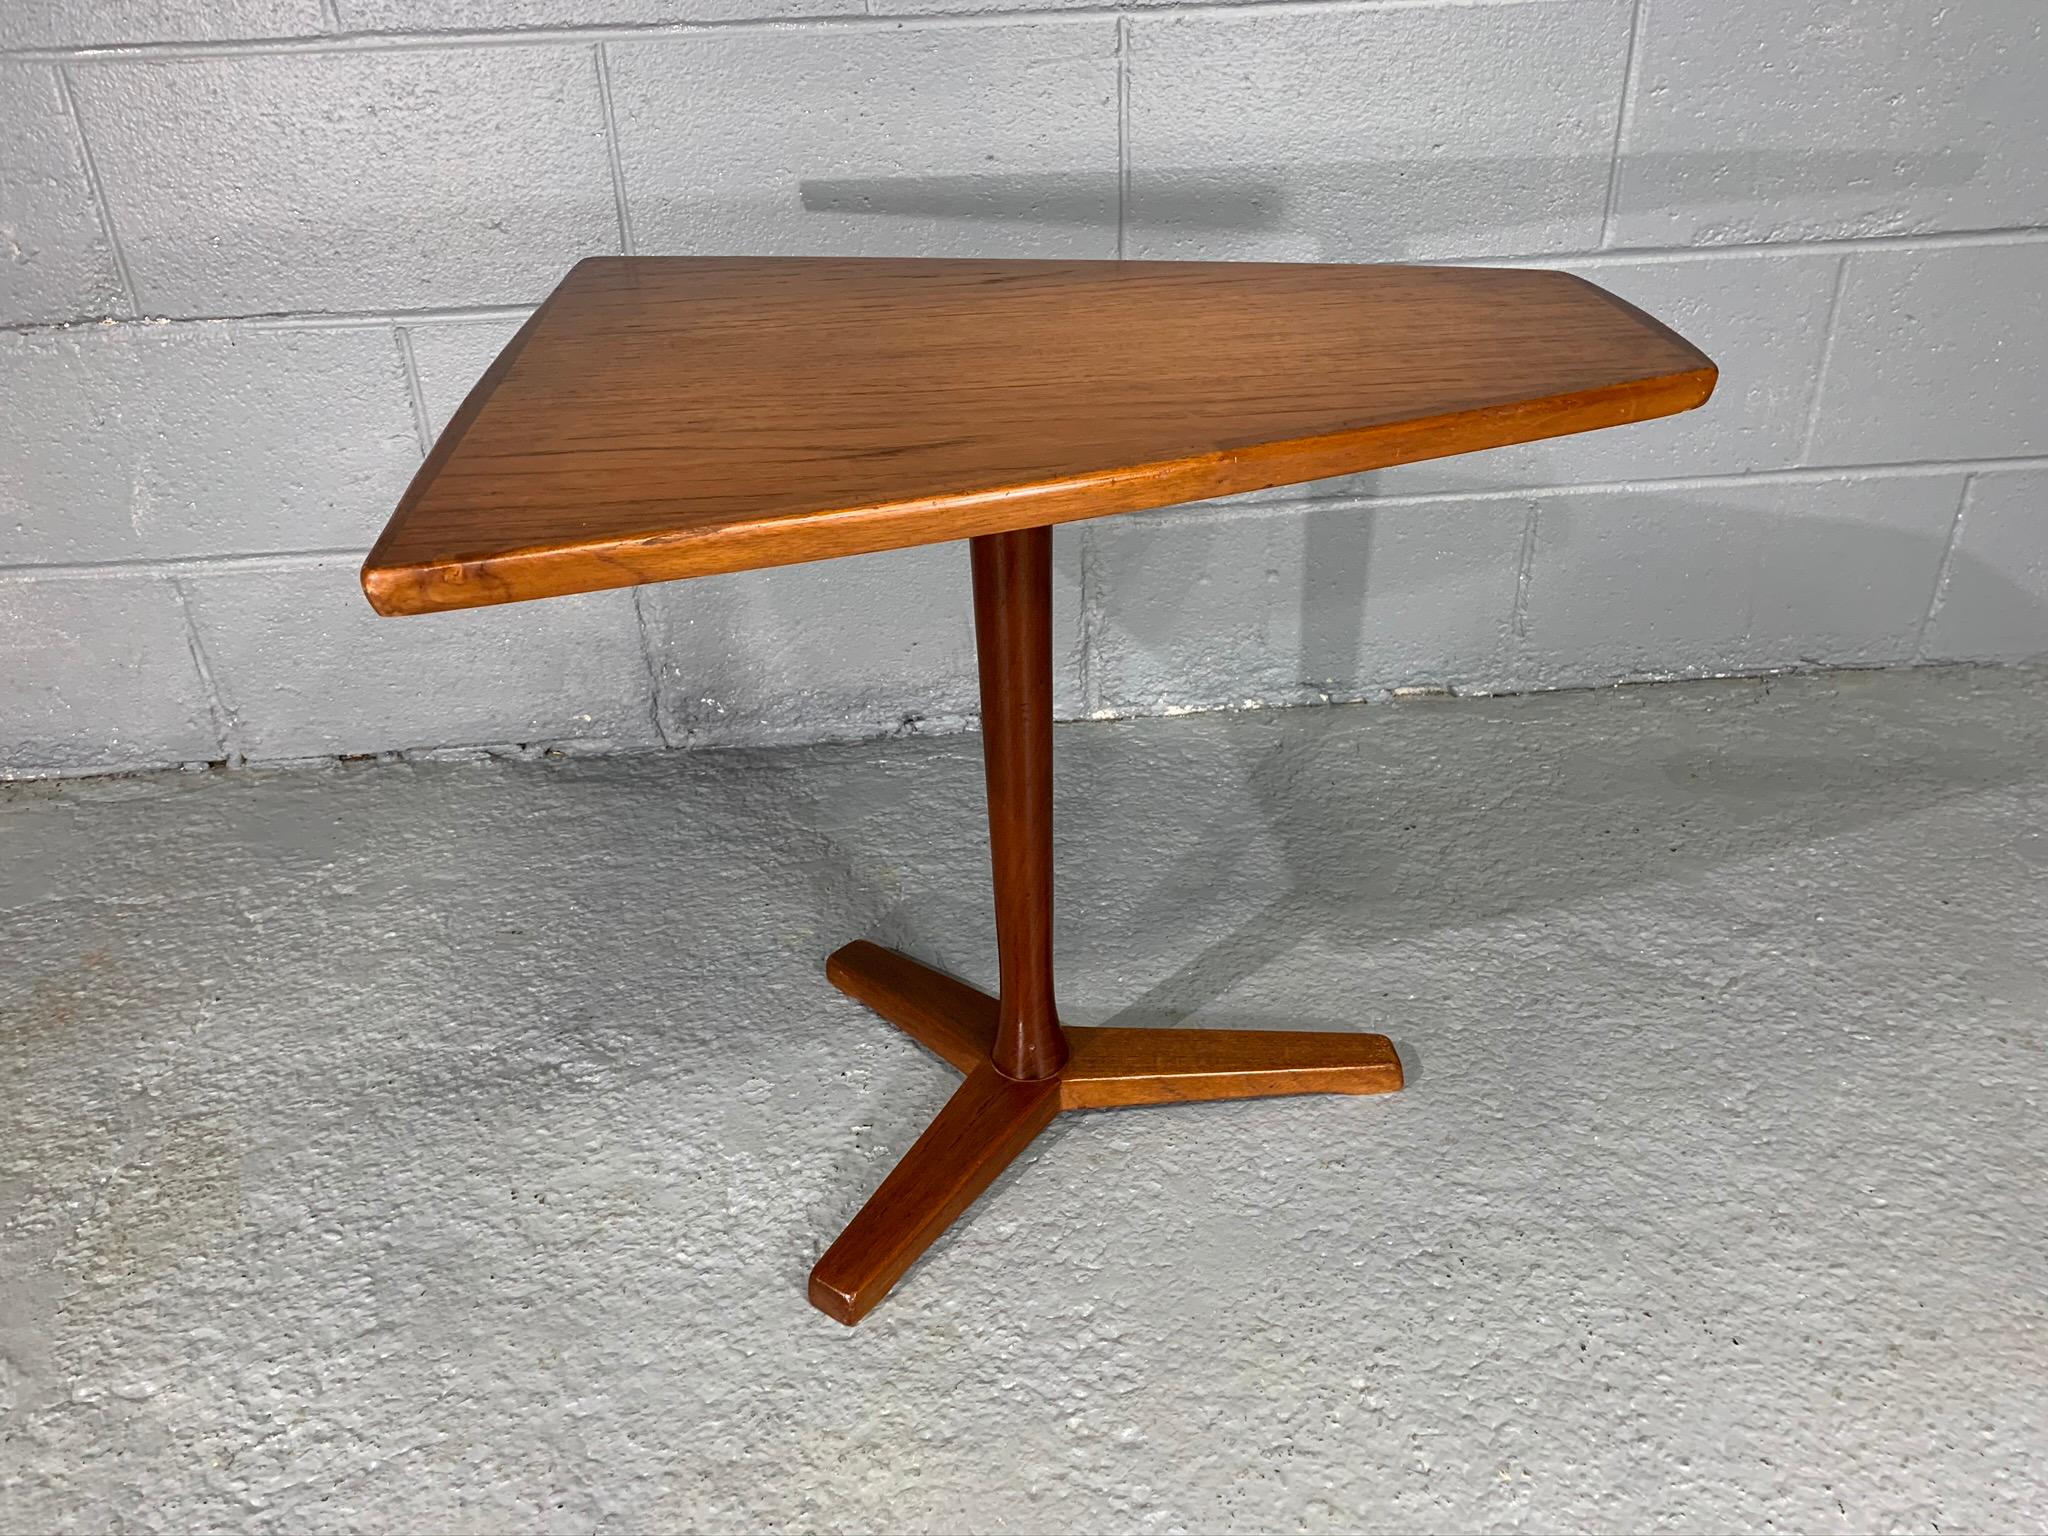 Unique side table with geometric, trapezoidal top manufactured by DUX of Sweden, circa 1960s. This teak tri-leg table plays with shapes and sizing creating a Minimalist Scandinavian Modern aesthetic. Top width starts at 20 inches and narrows to 8